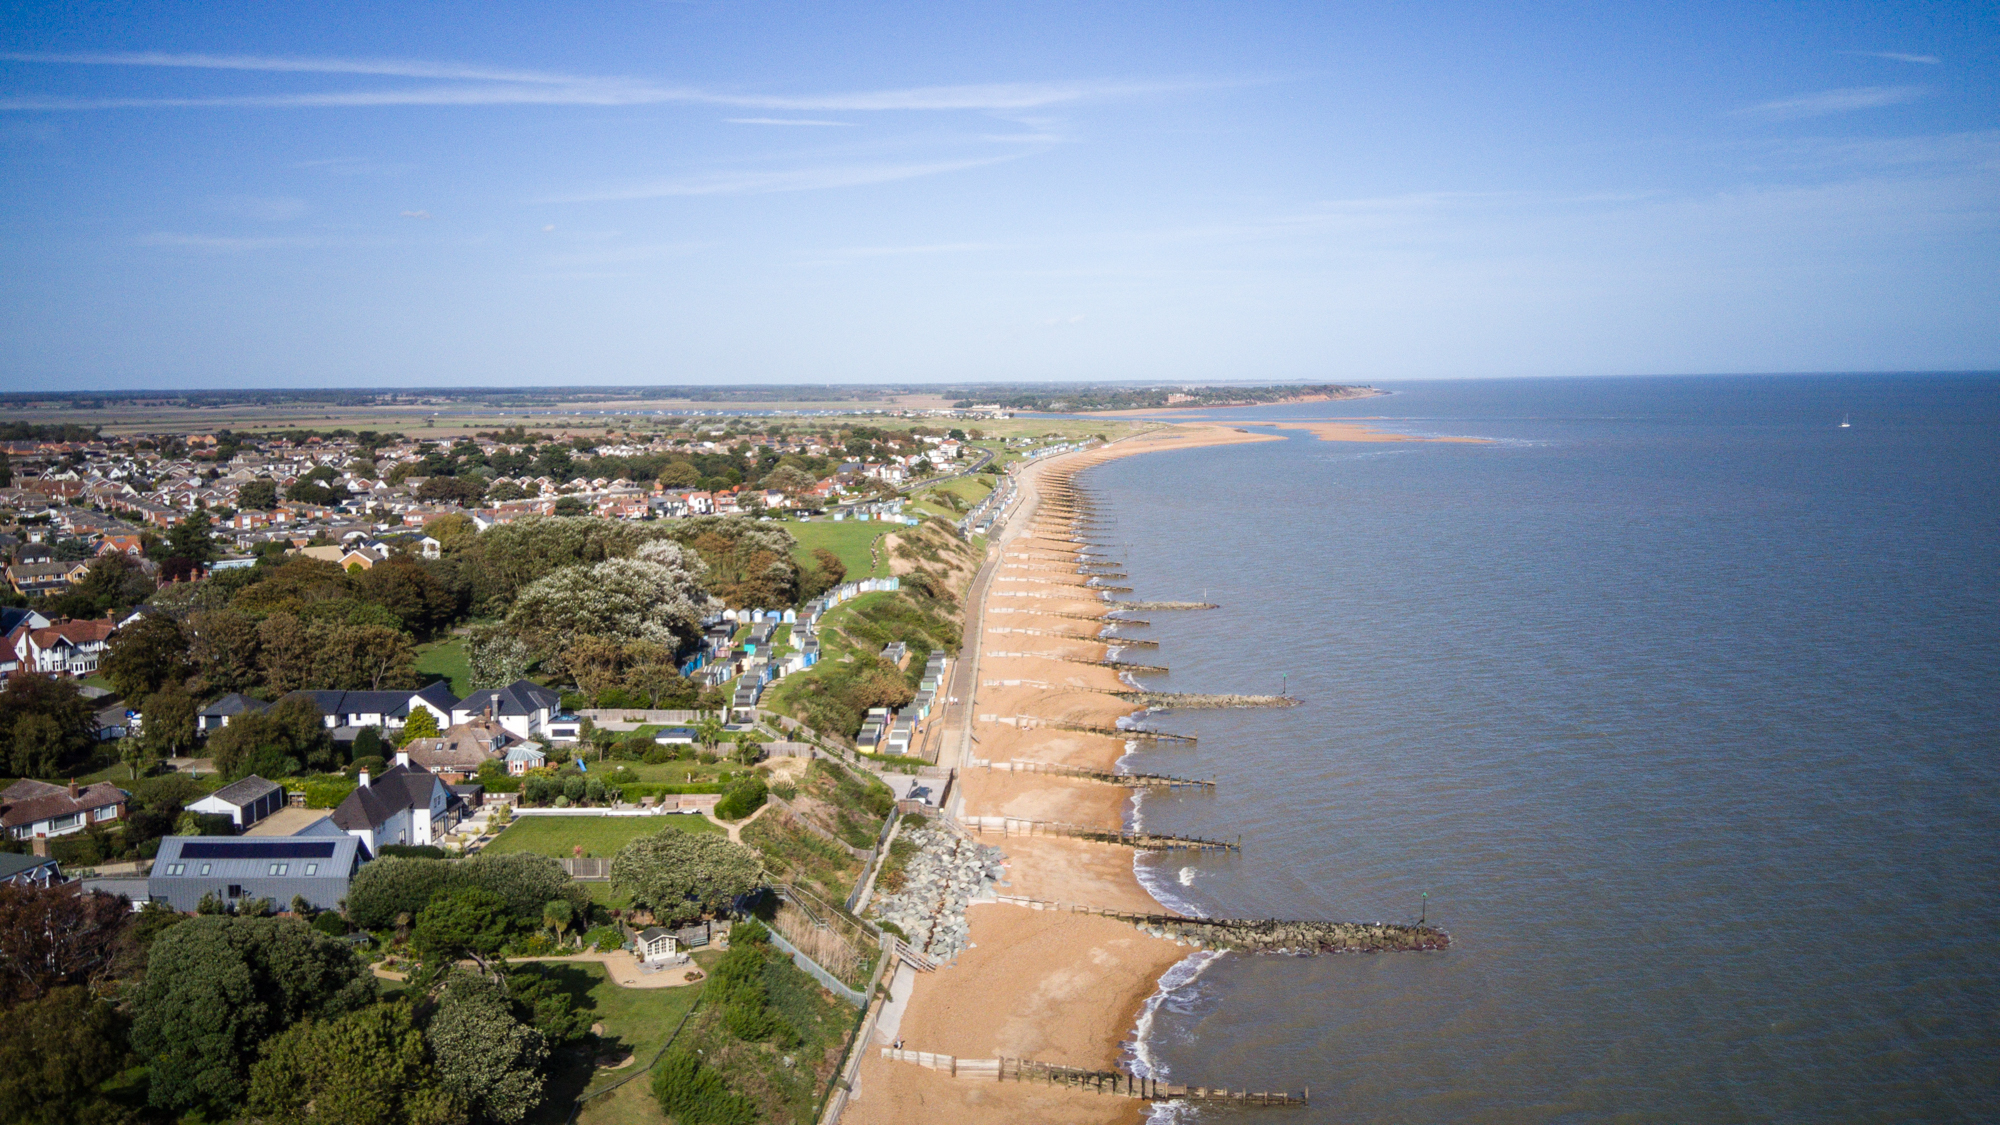 Photo of the coast taken with the Potensic Atom drone